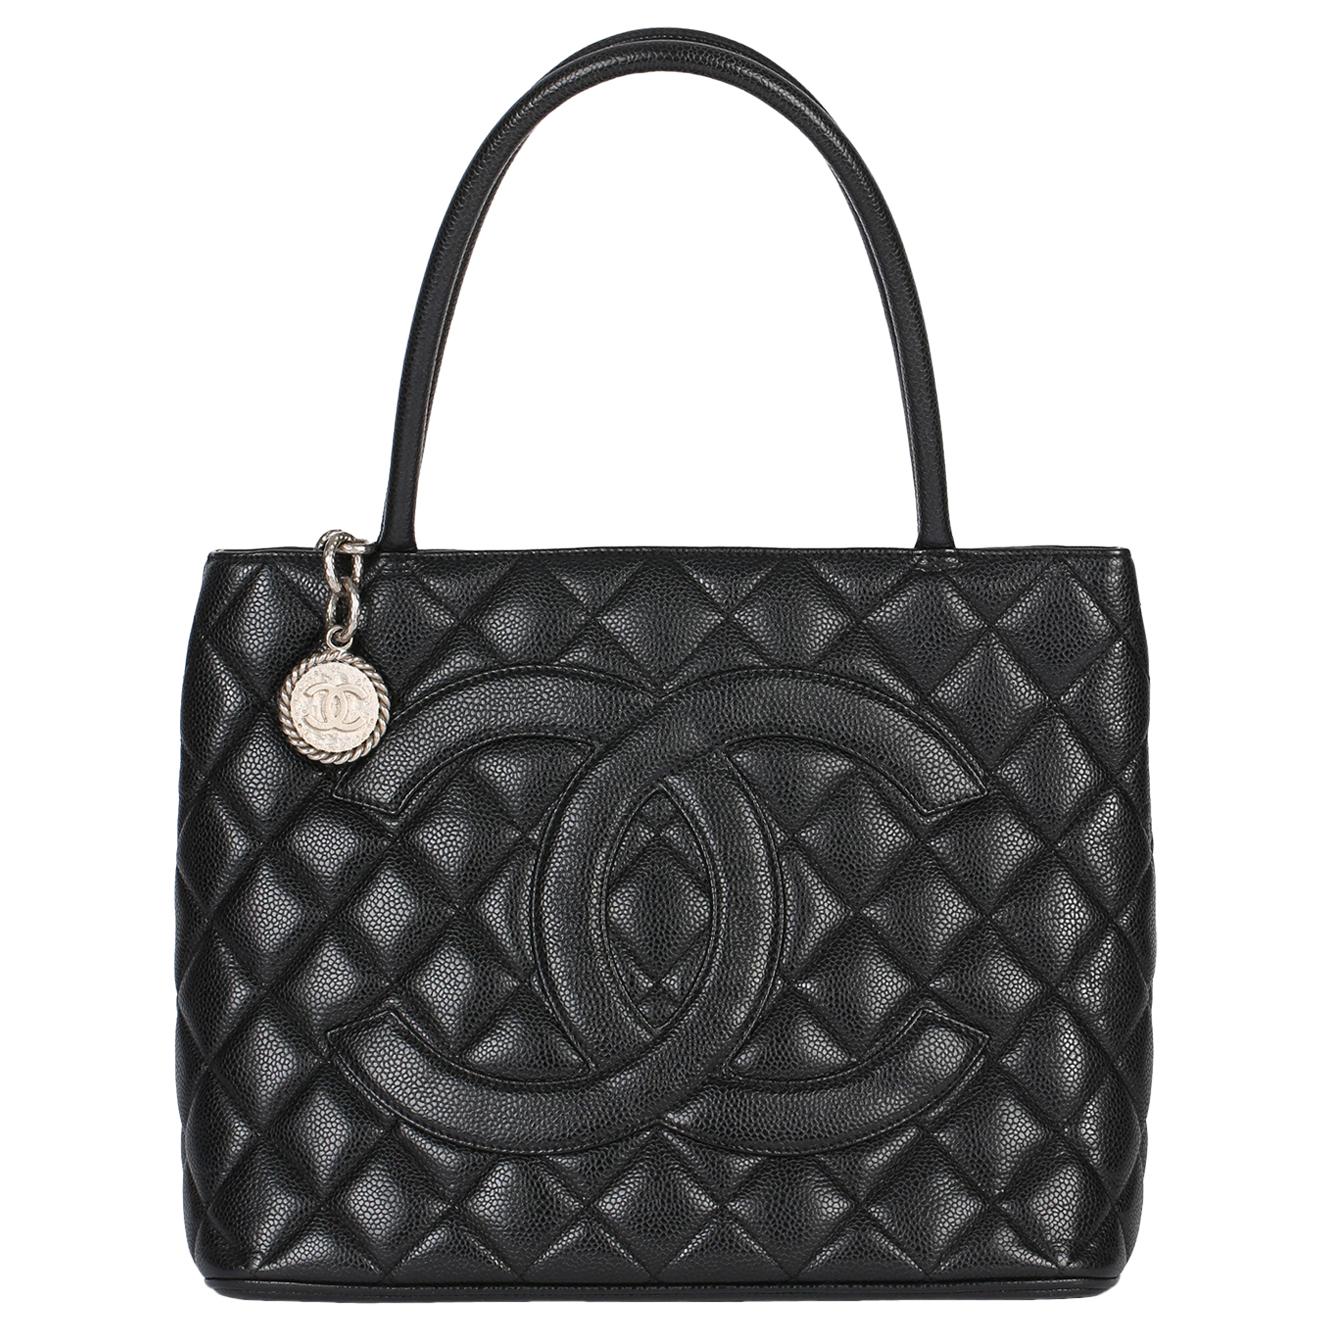 2002 Chanel Black Quilted Caviar Leather Vintage Medallion Tote 